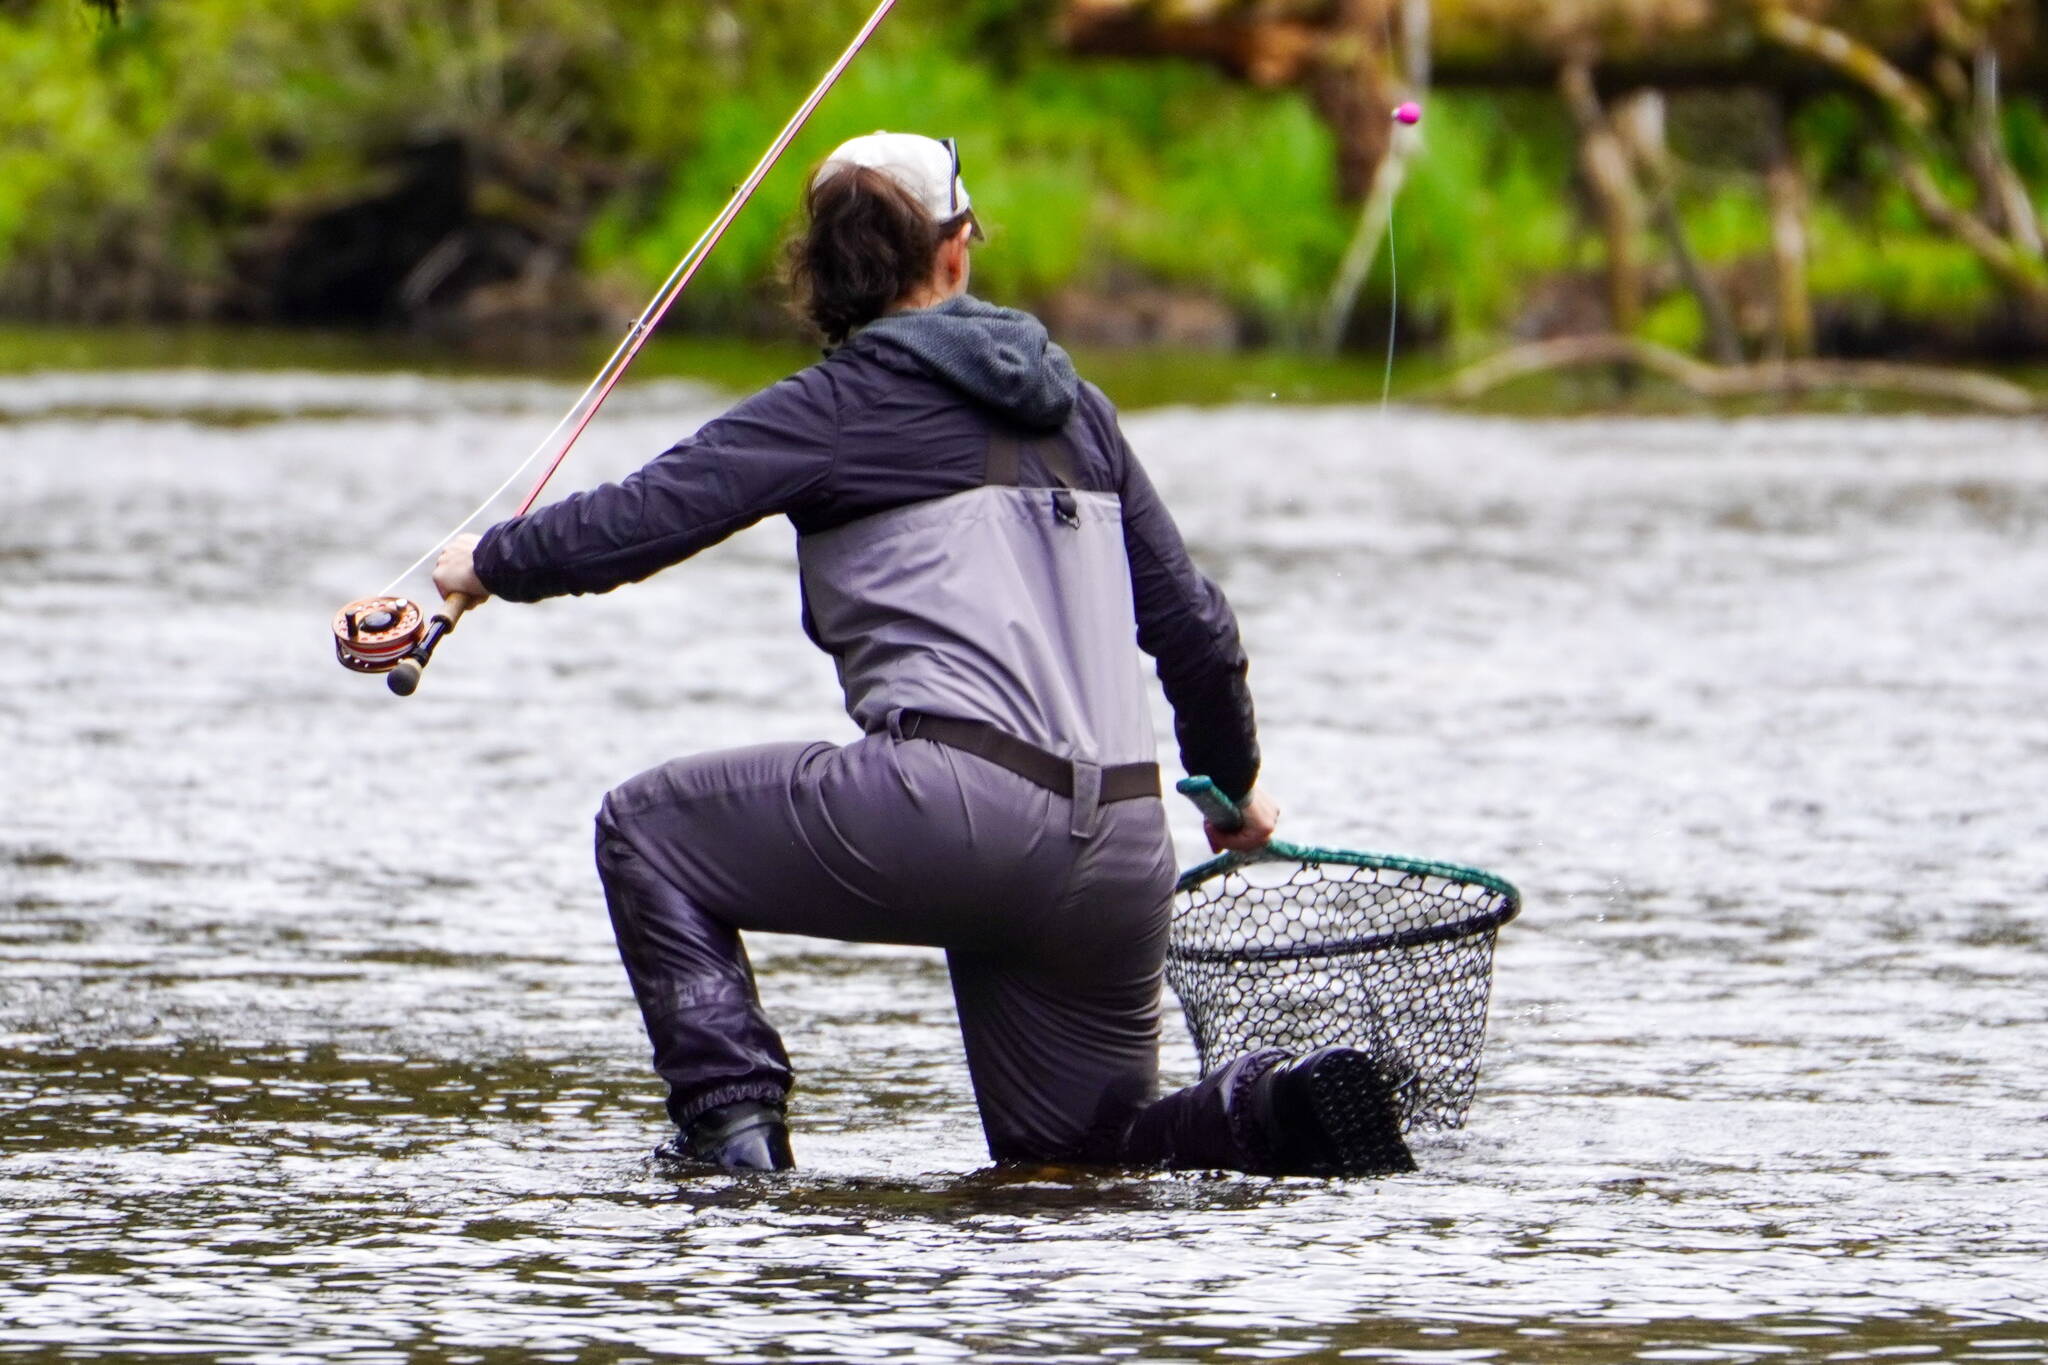 The author’s wife kneels to net a trout over the weekend. (Photo by Jeff Lund)